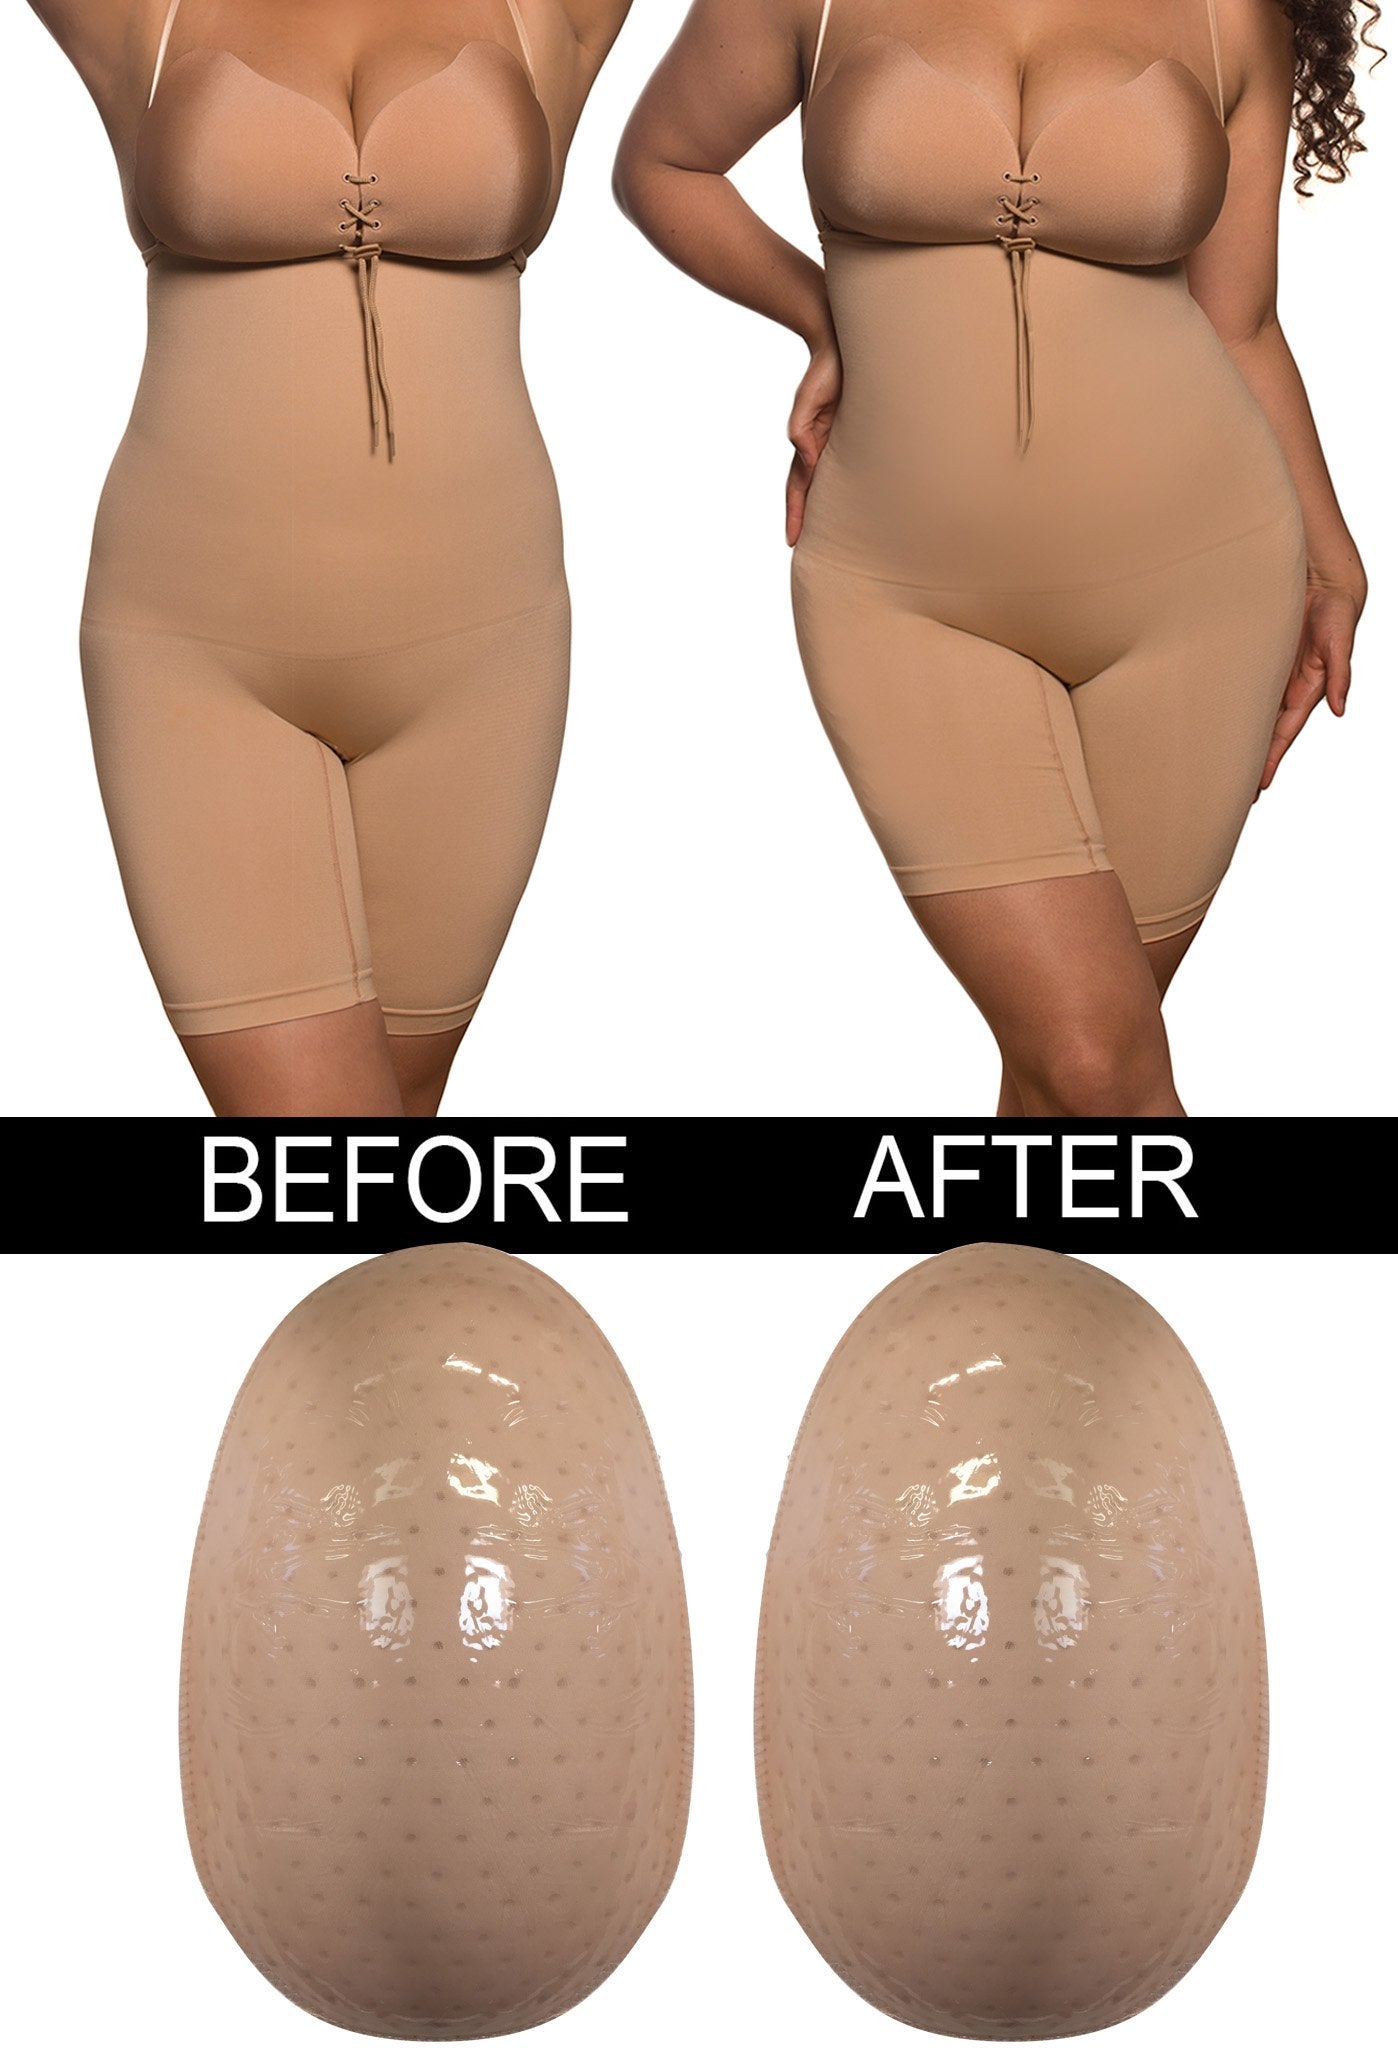 Silicone hip pads - Increase those curves to perfection.